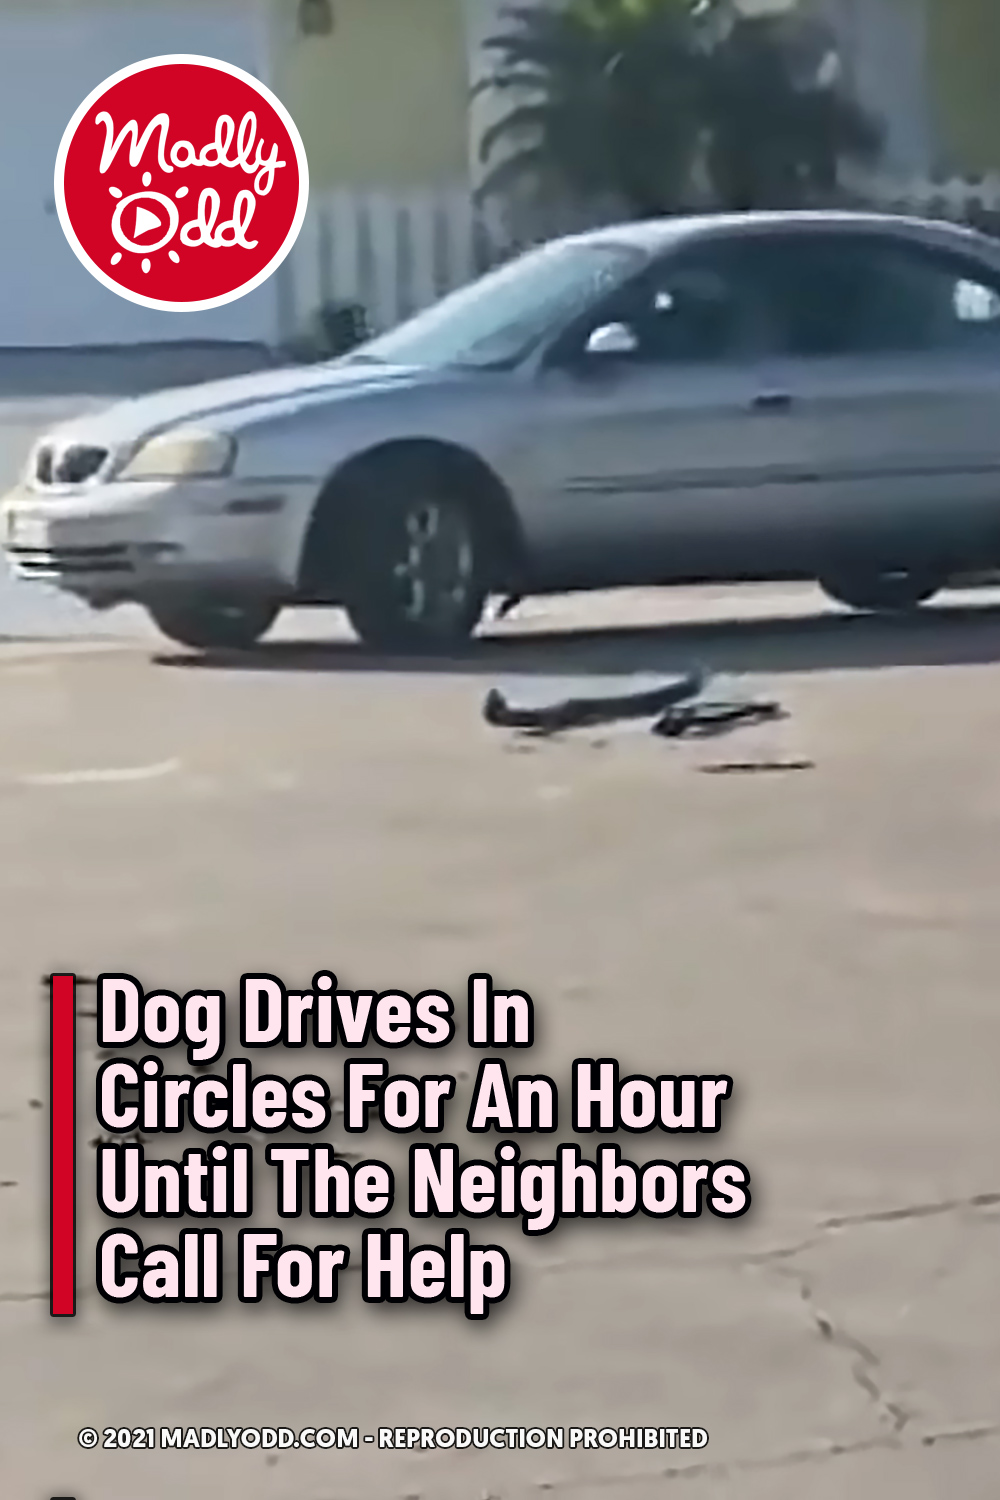 Dog Drives In Circles For An Hour Until The Neighbors Call For Help